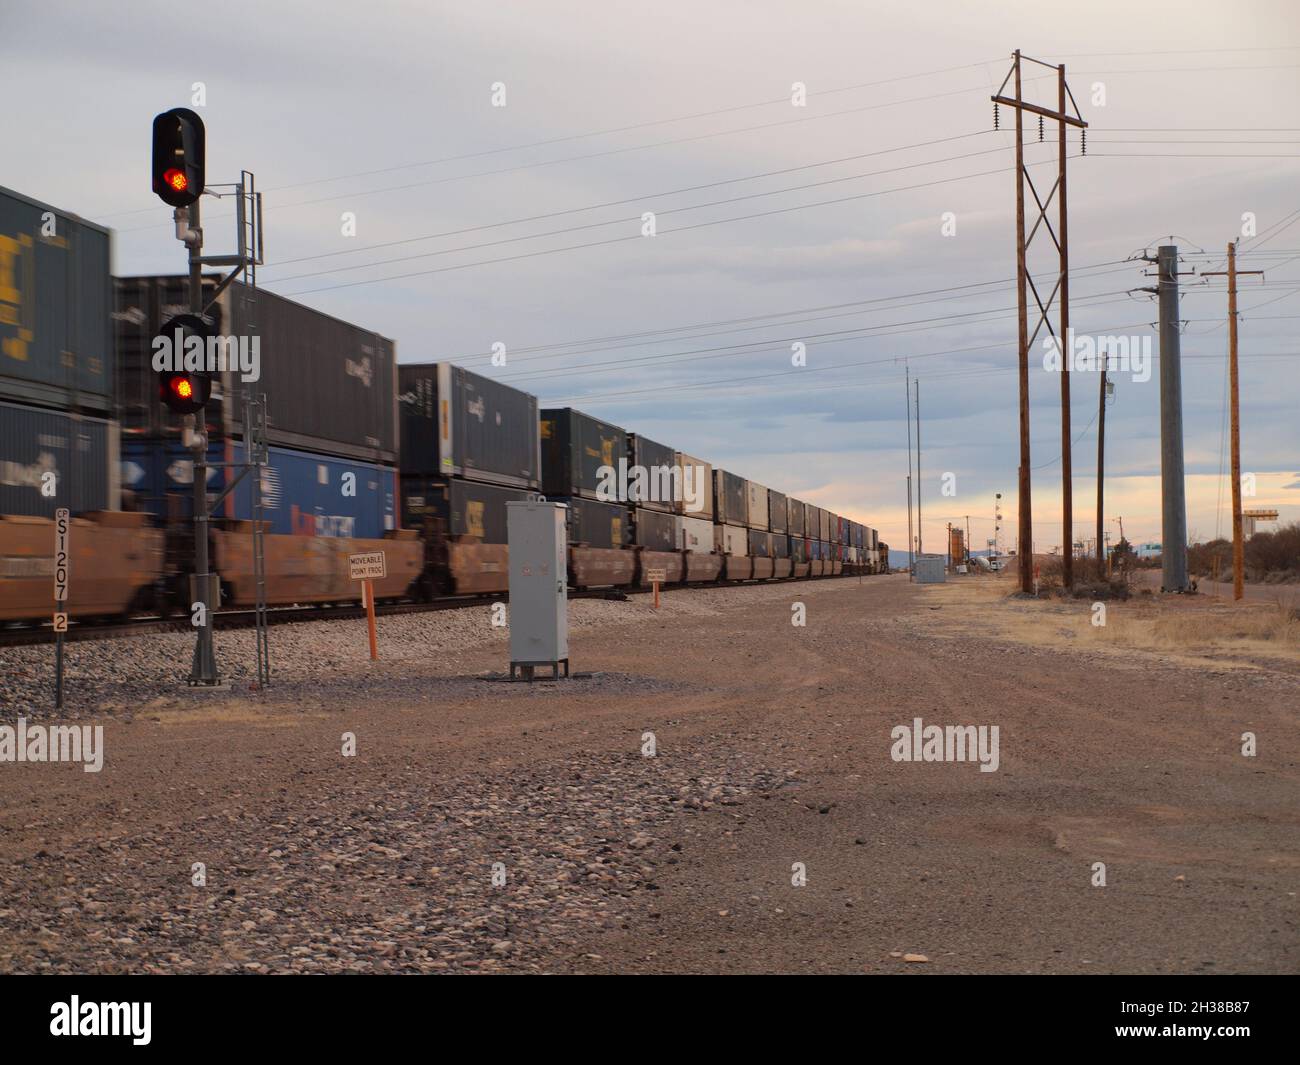 Union Pacific train through the American Southwest at Deming, New Mexico. Both enclosed auto carriers and containers are shown heading west at speed. Stock Photo